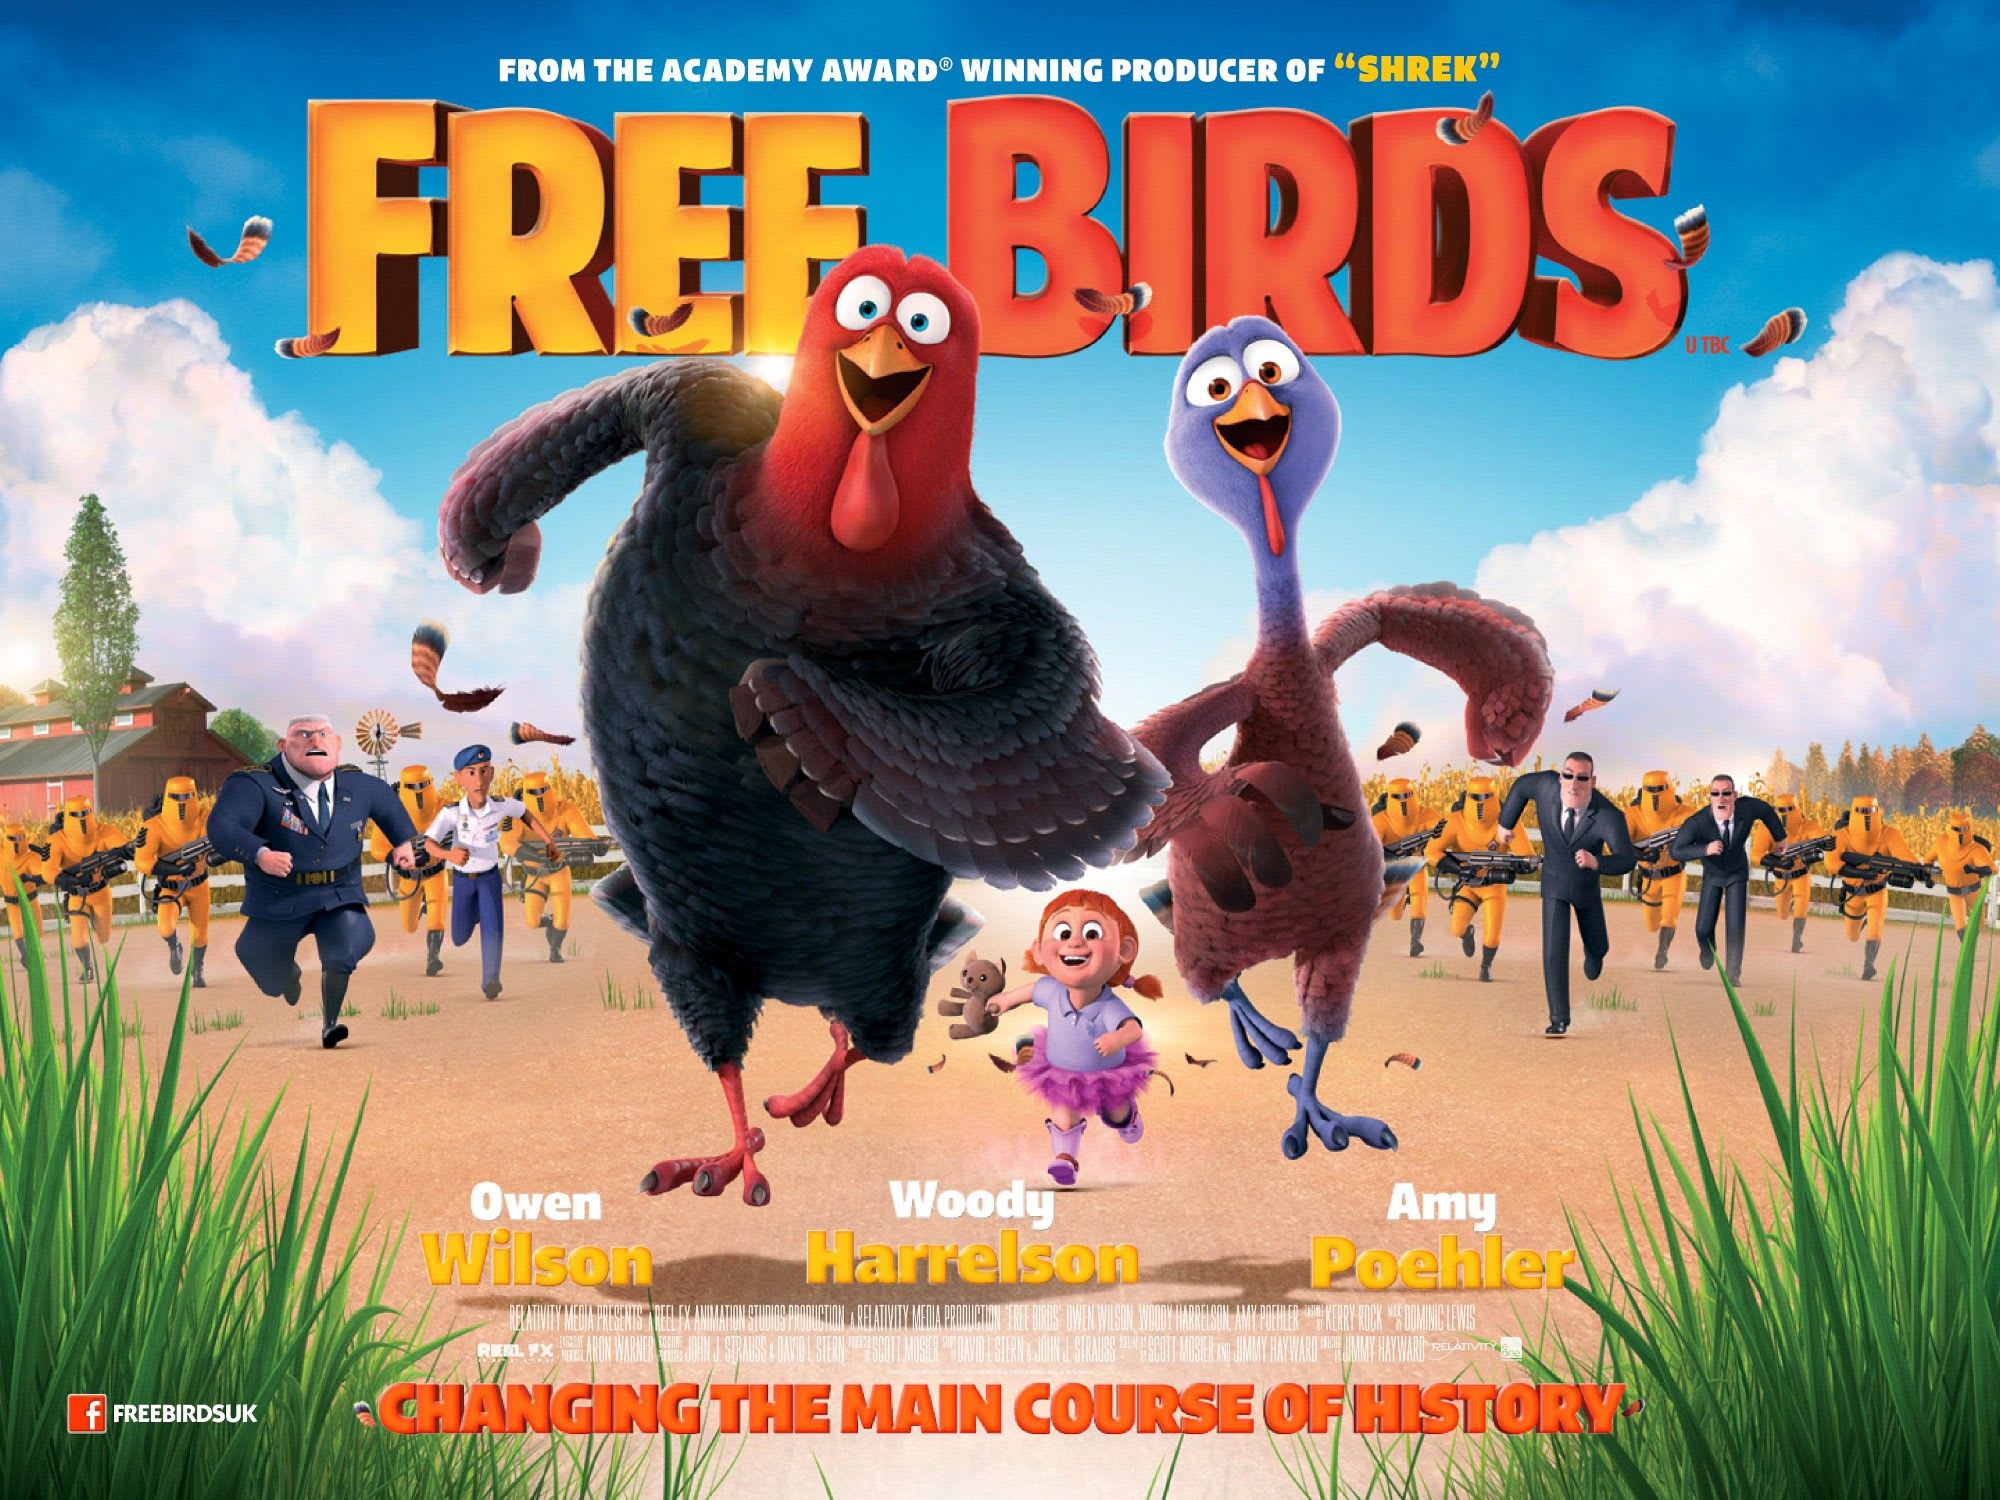 Best Holiday and Christmas Movies on Netflix: Free Birds